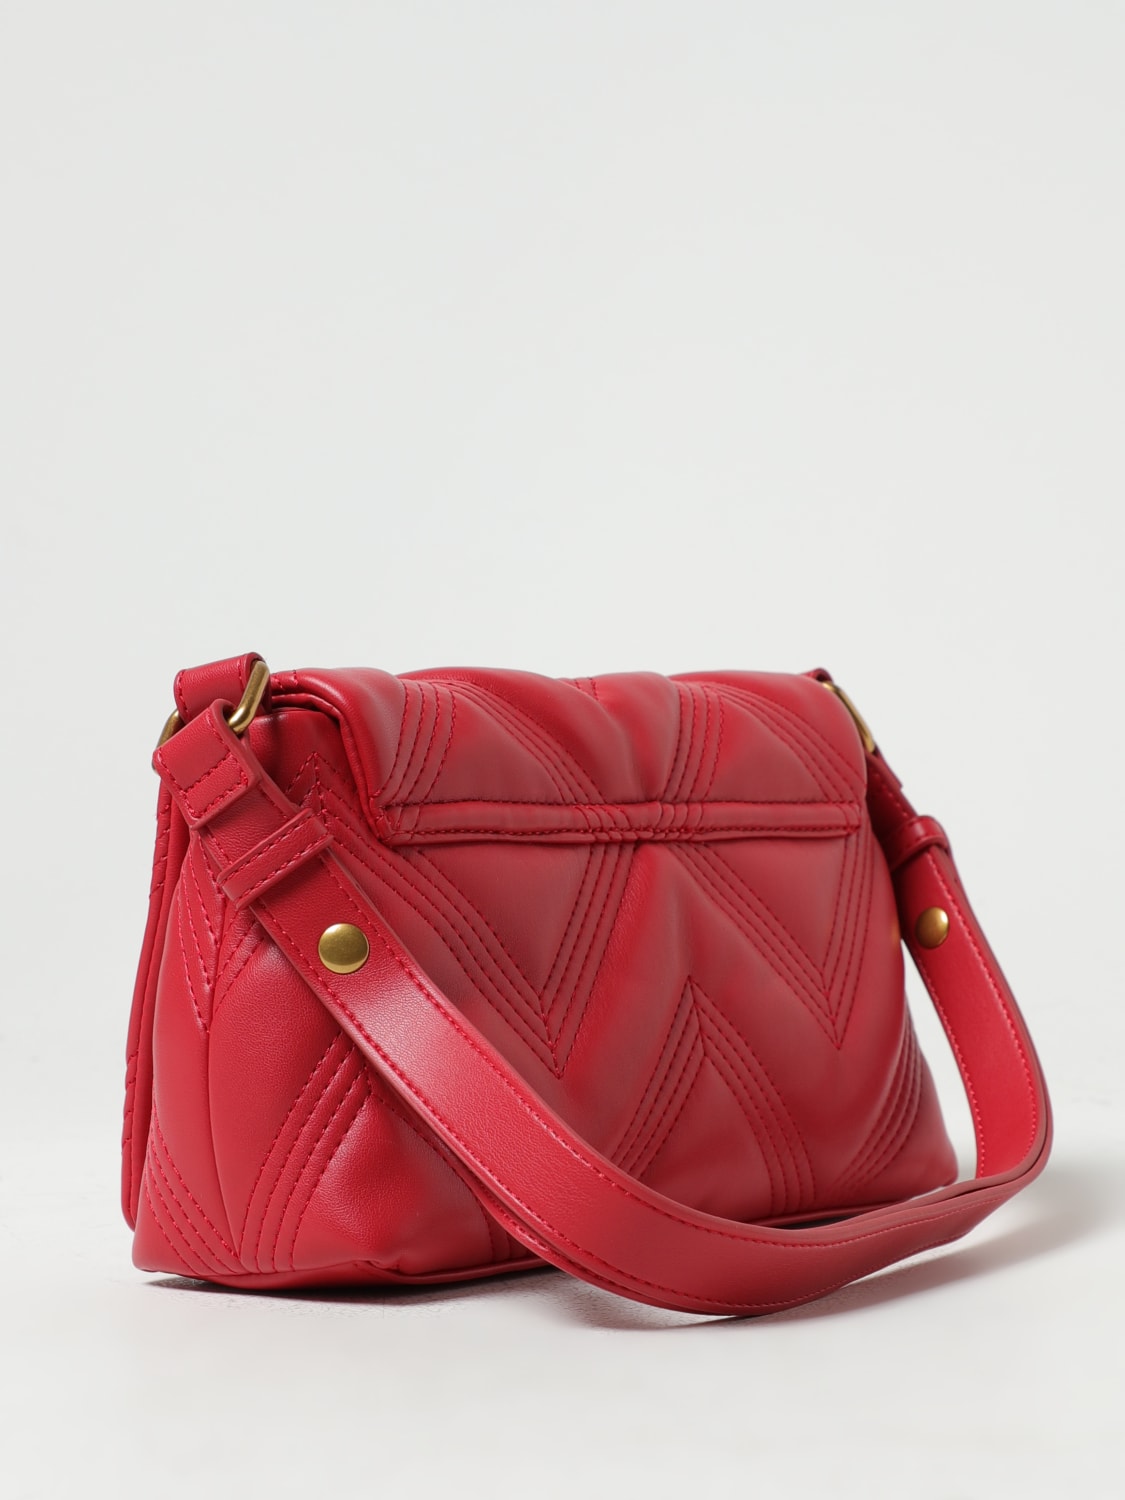 MCM Women's Red Patricia Ruby Quilted Leather Shoulder Bag